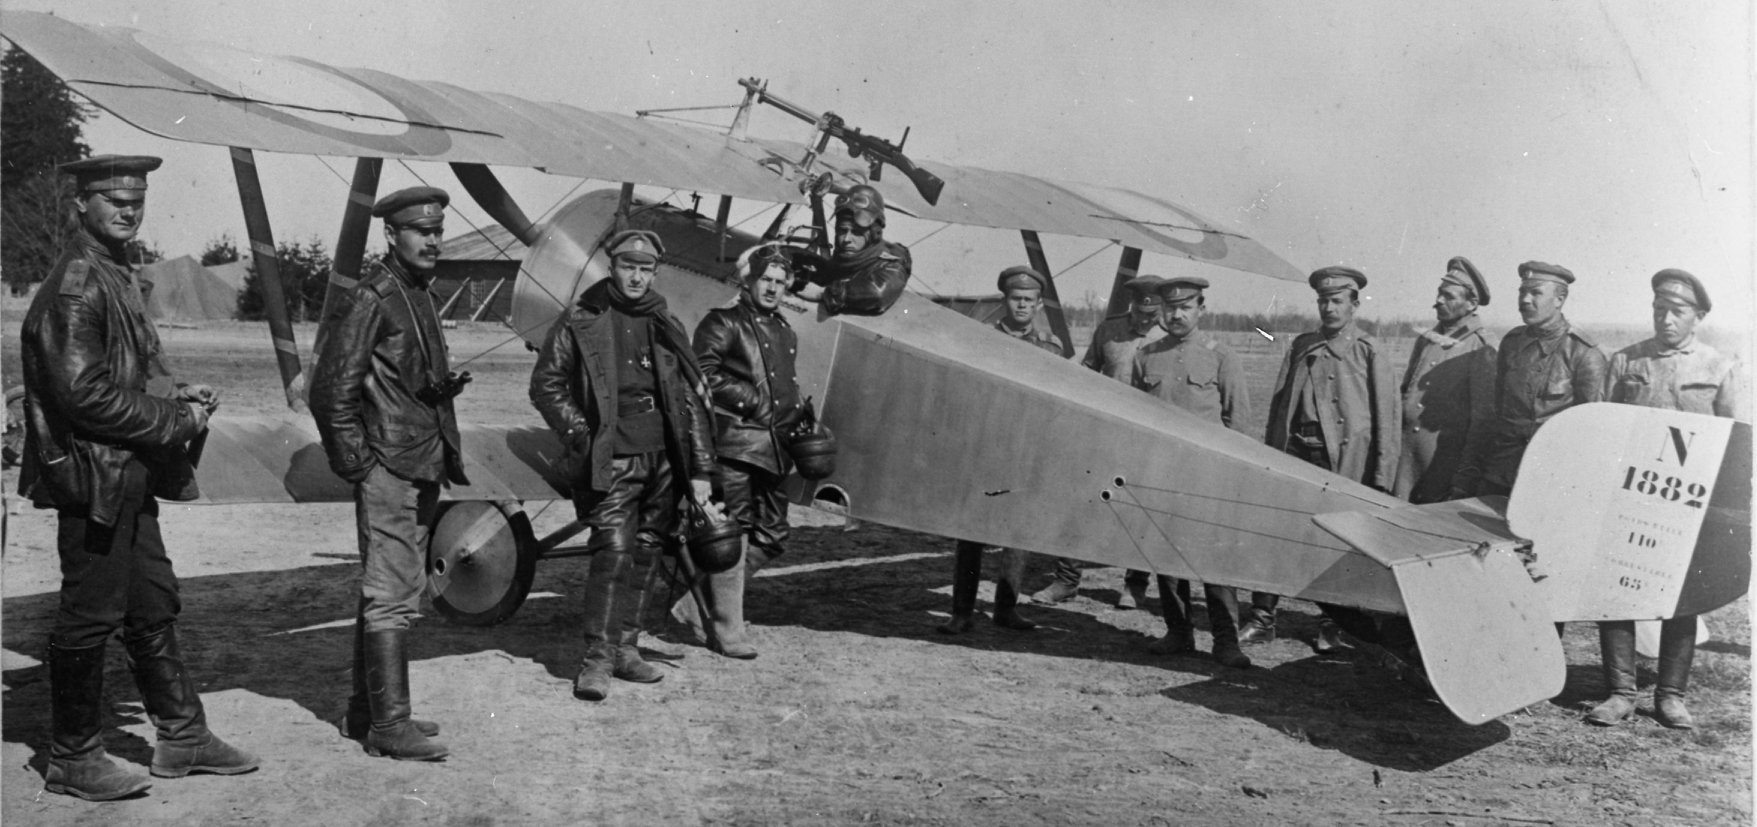 Grenadier corps aviation squadron of Russian Imperial airforce